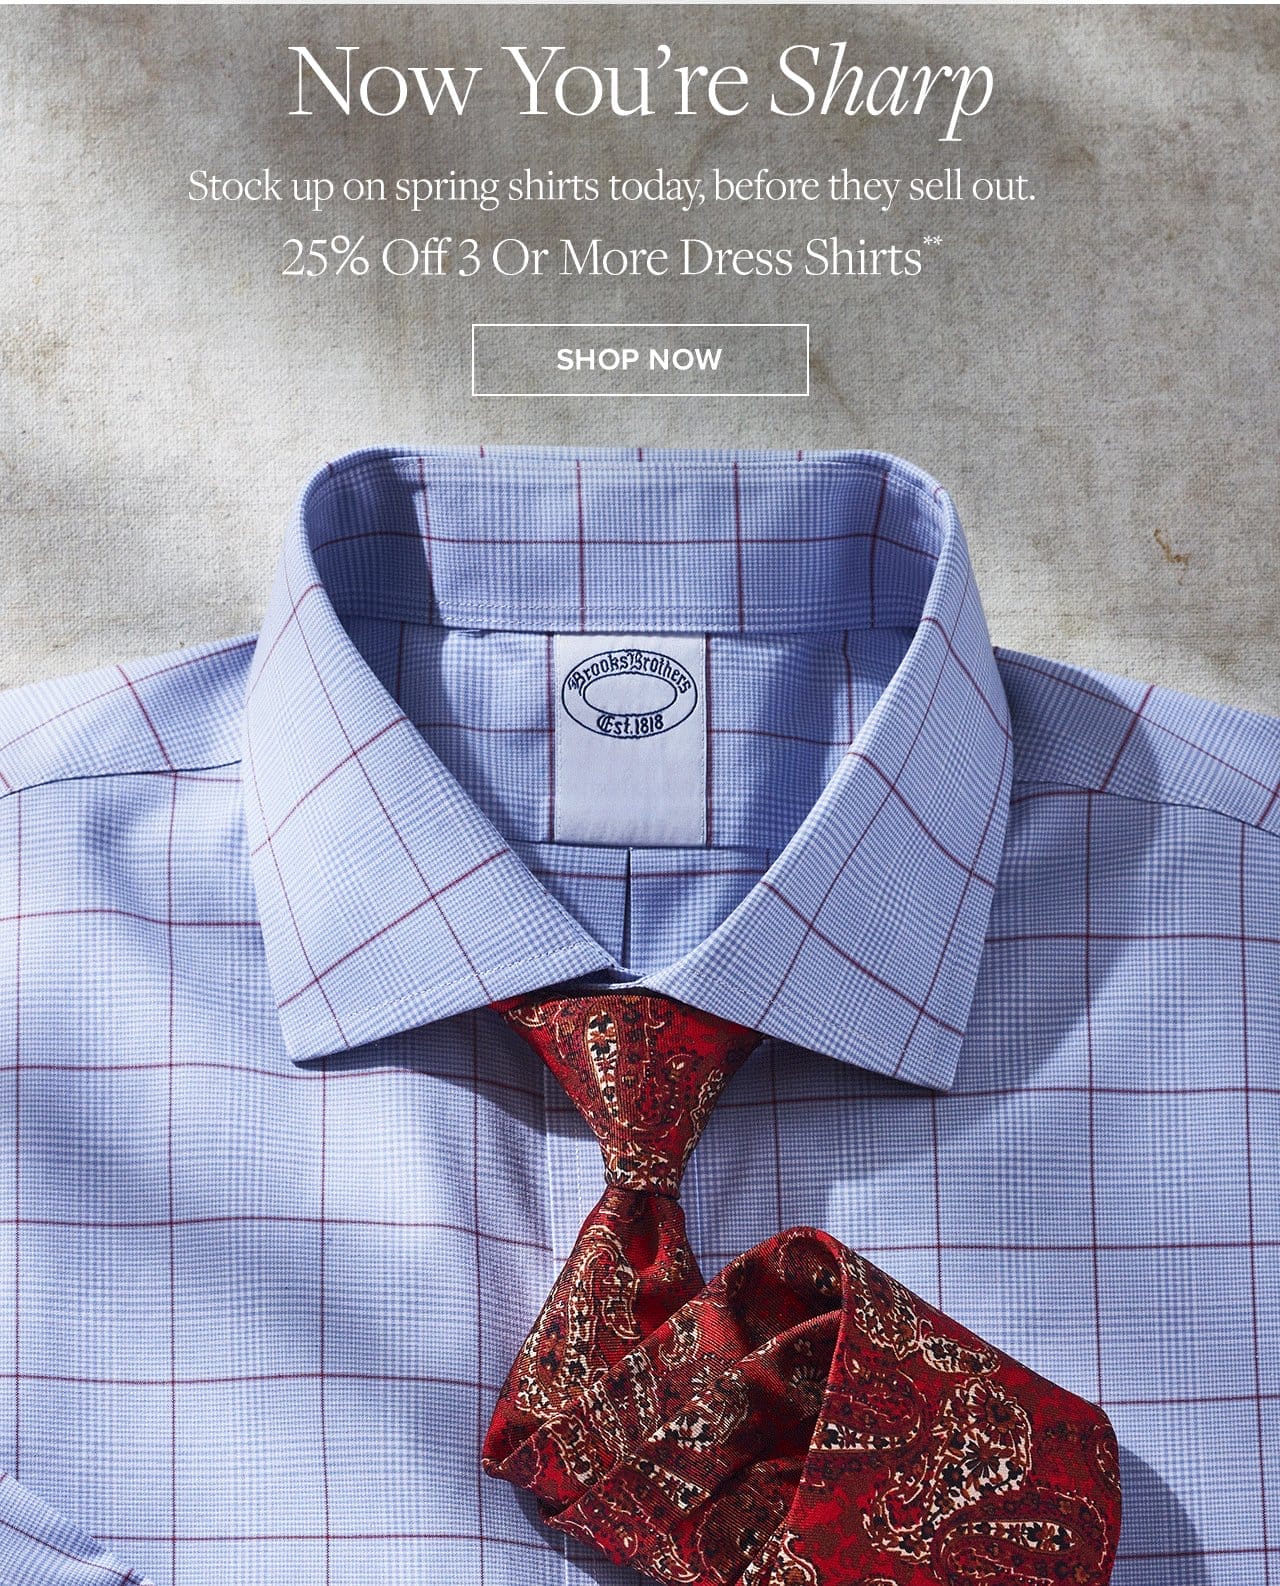 Now You're Sharp Stock up on spring shirts today, before they sell out. 25% Off 3 Or More Dress Shirts Shop Now